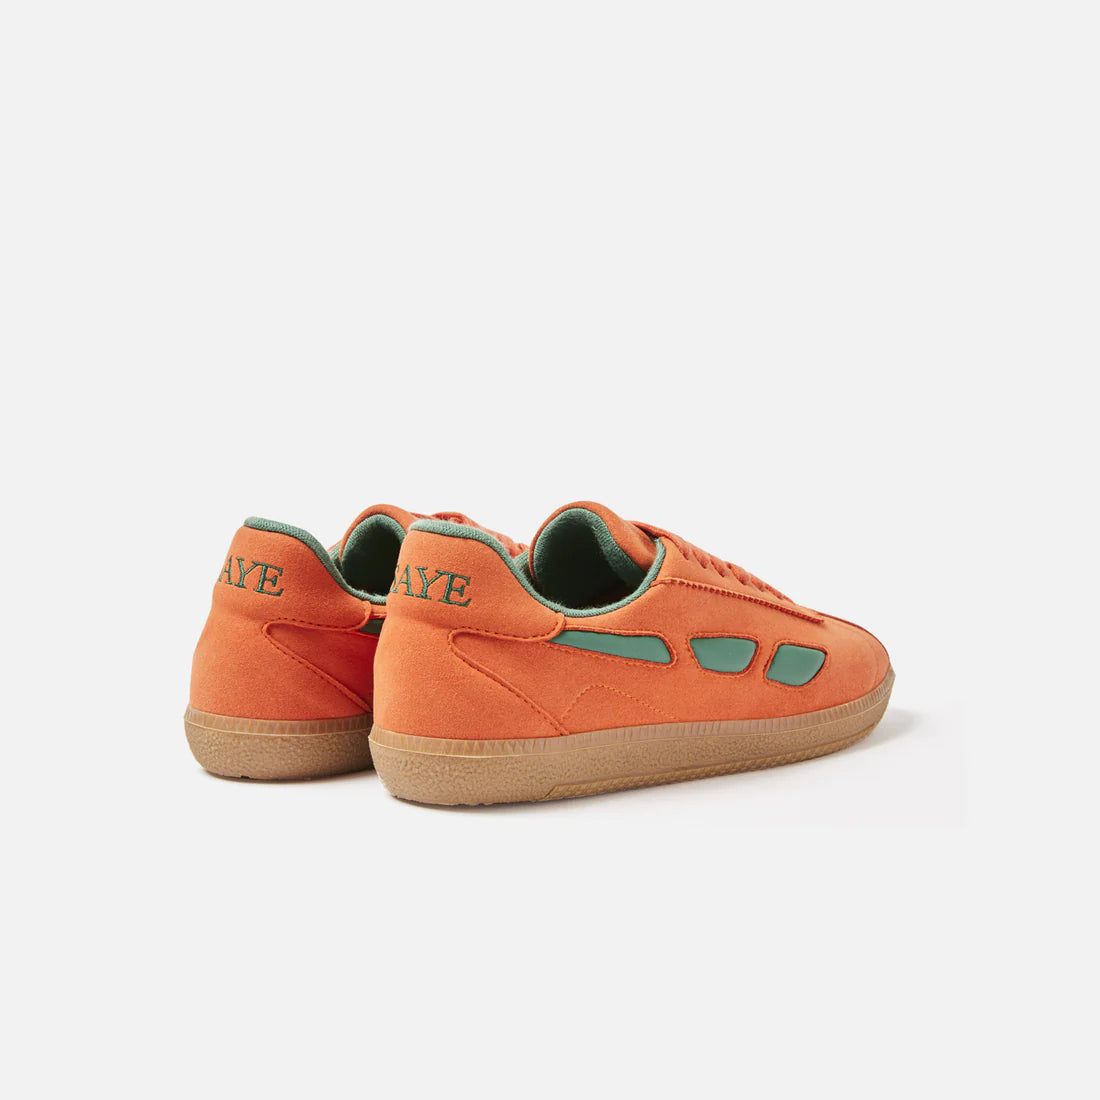 A pair of SAYE Modelo '70 Sneakers - Orange & Green with a retro silhouette.